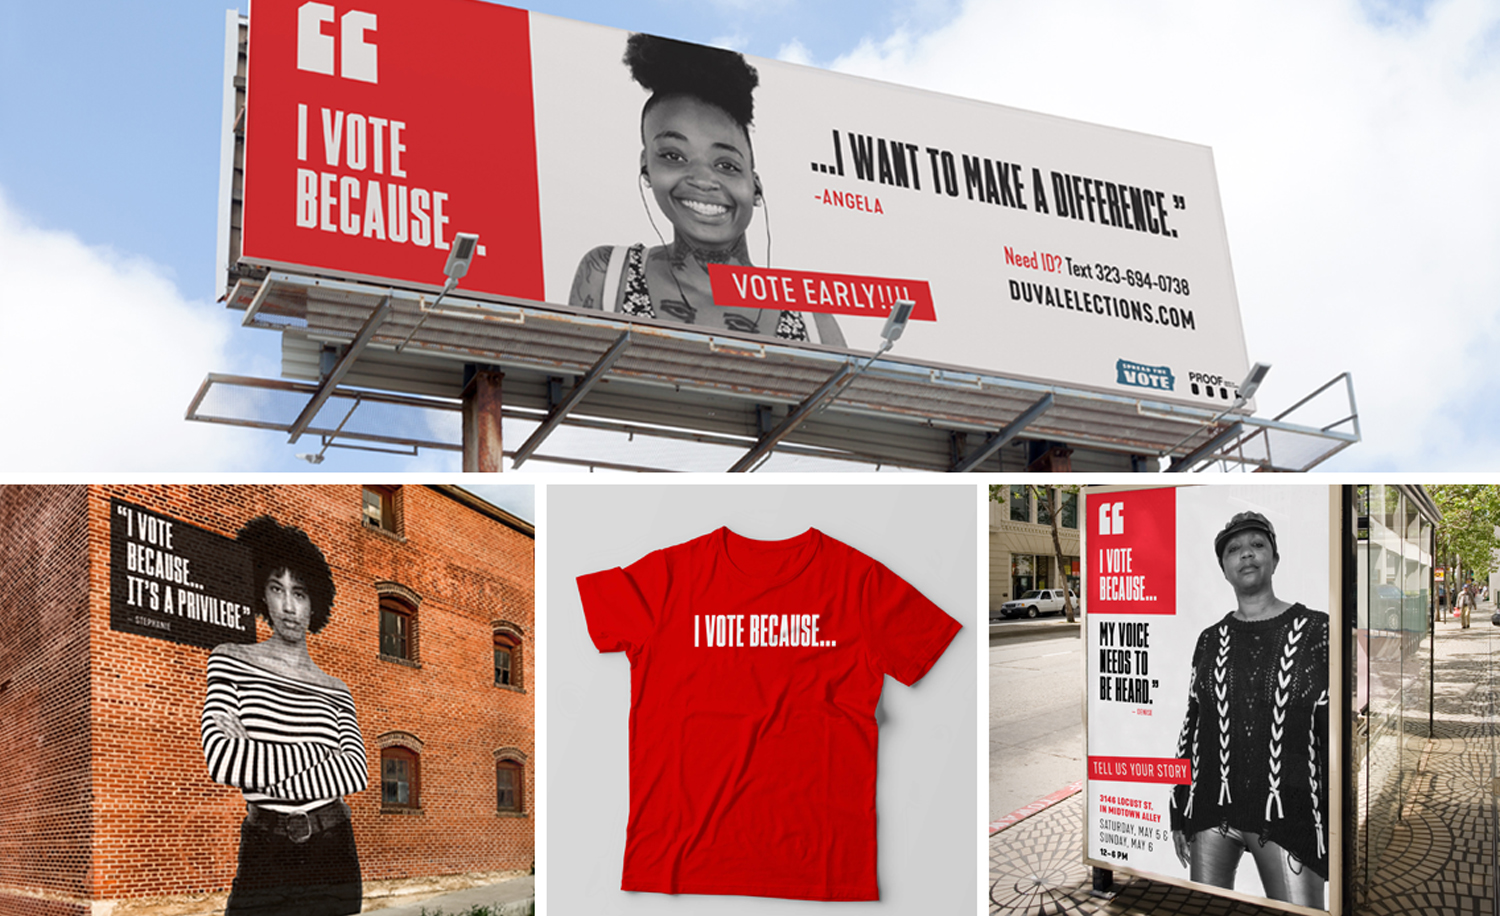 I Vote Because campaign shown on billboard, mural, t-shirt, bus shelter